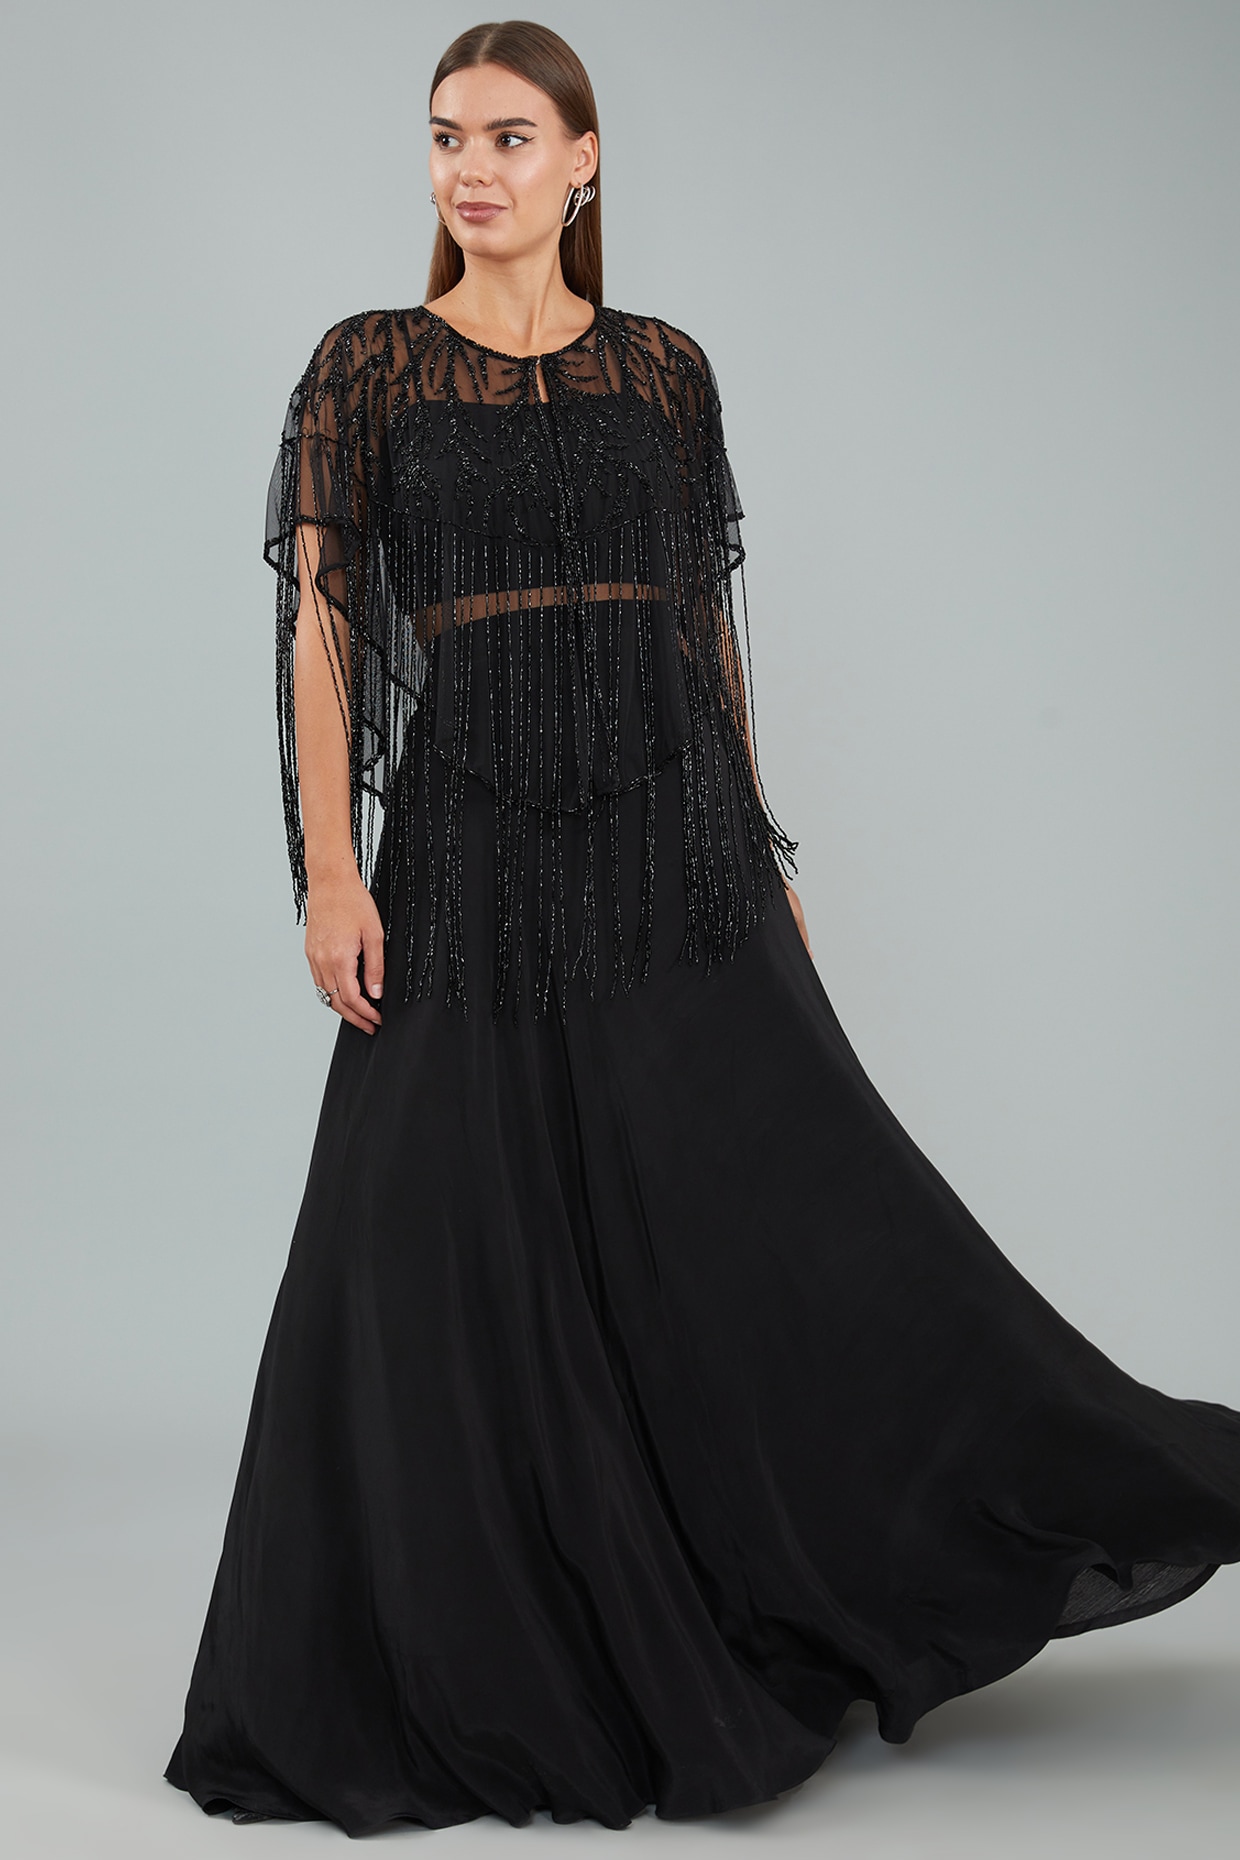 Defab In Style - Umbrella gown with net embroidery yoke and transparent  boat neck. | Facebook